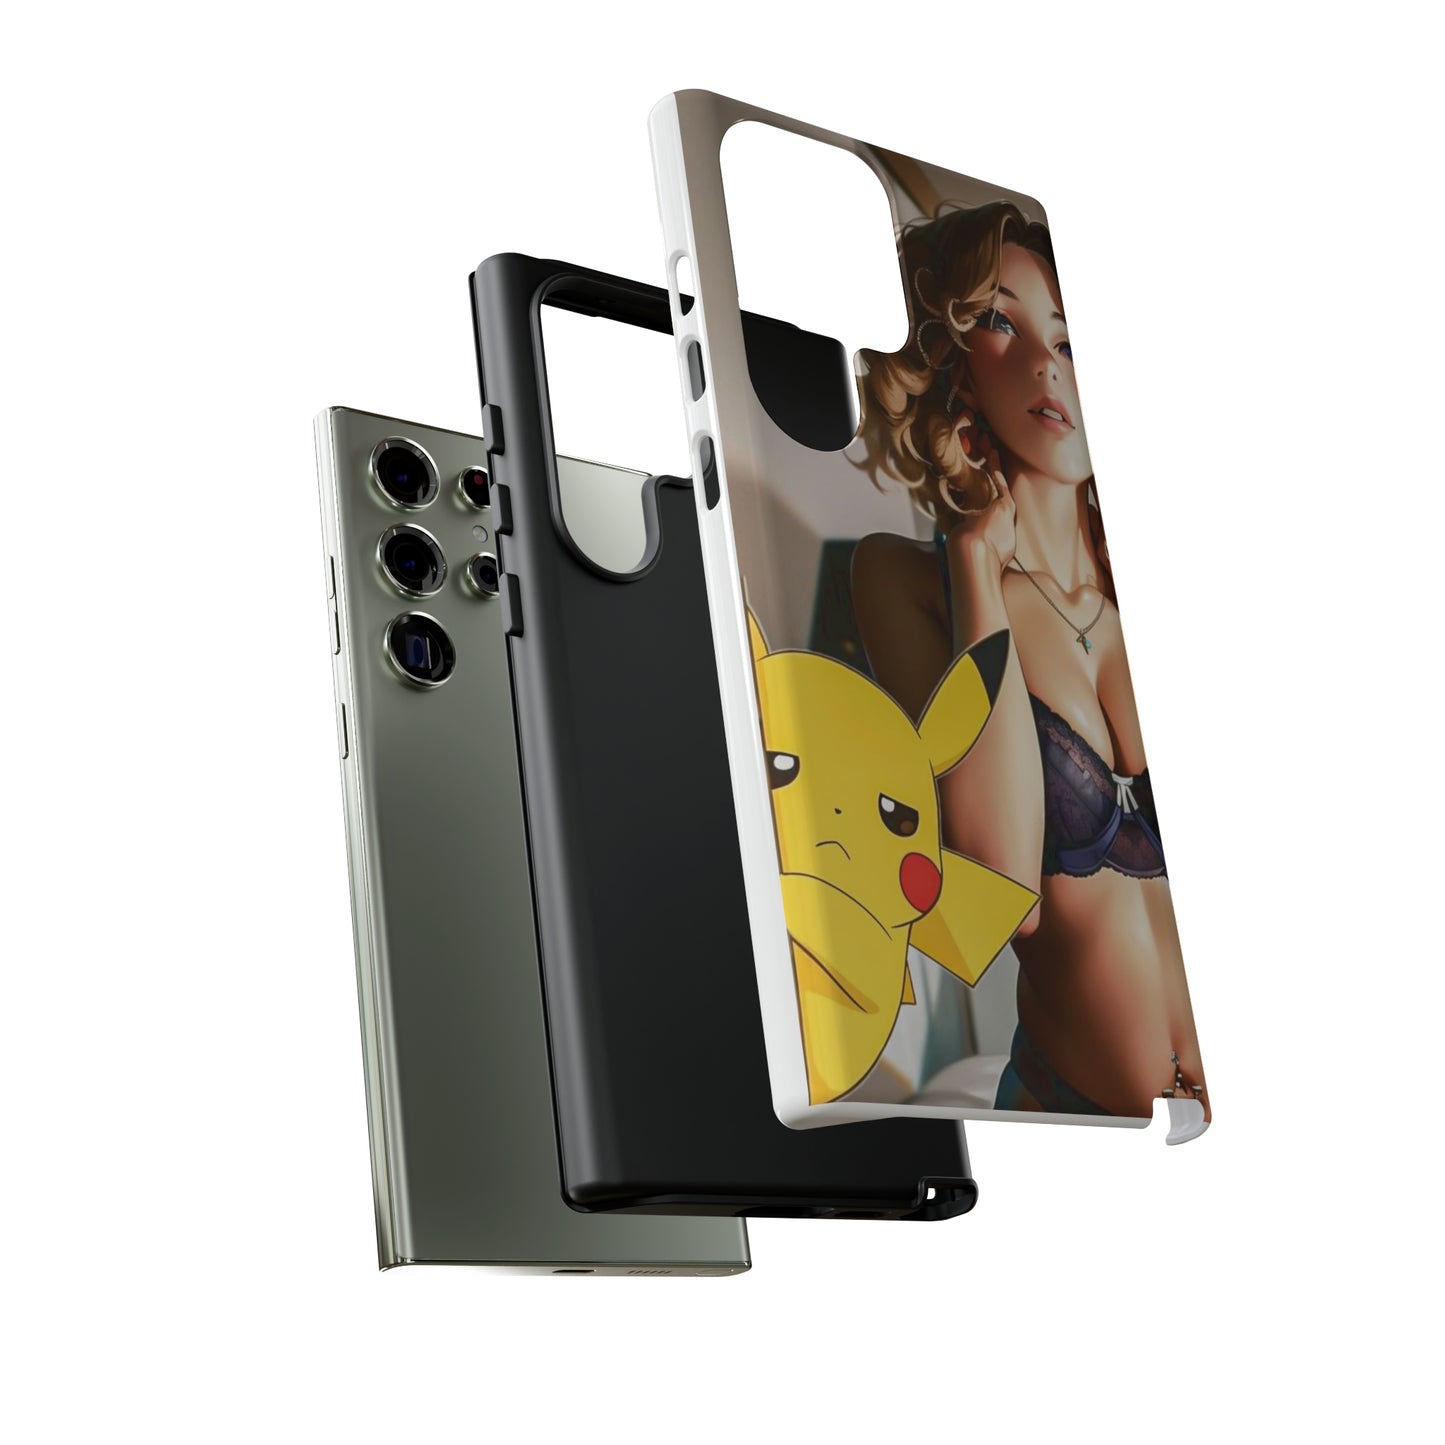 Blonde with Pika- Anime Style Art Tough Cases